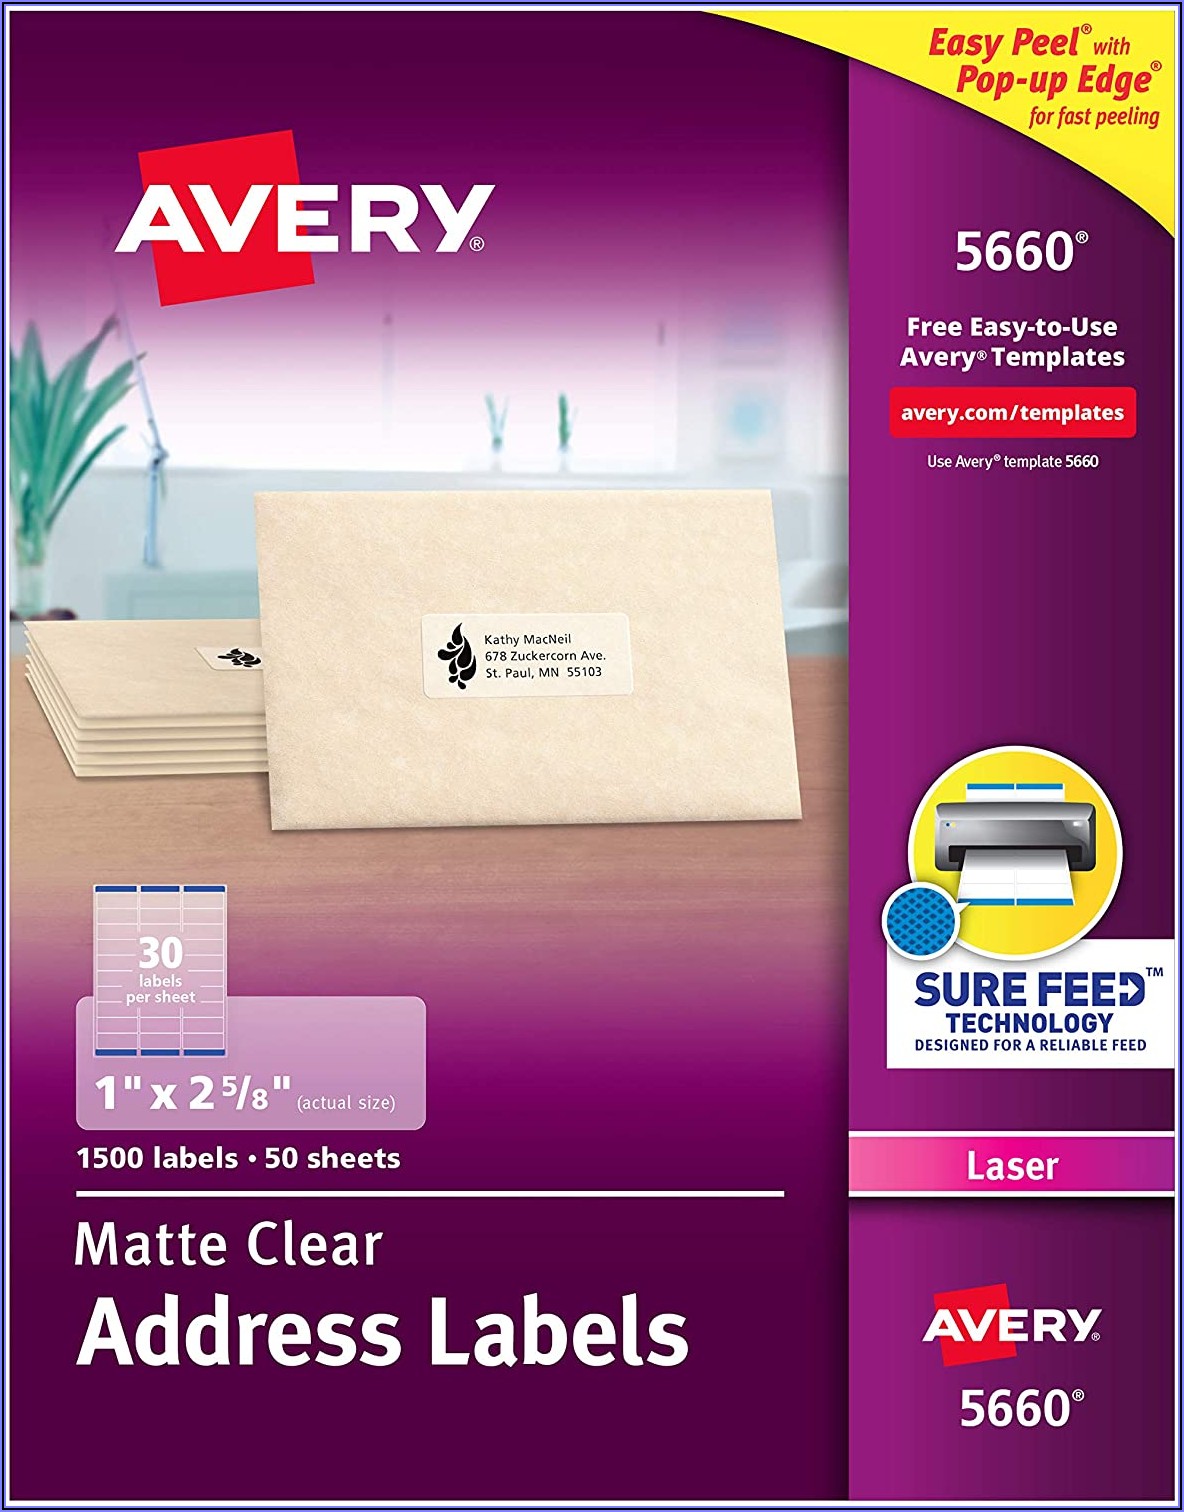 Avery Mailing Label Template 5660